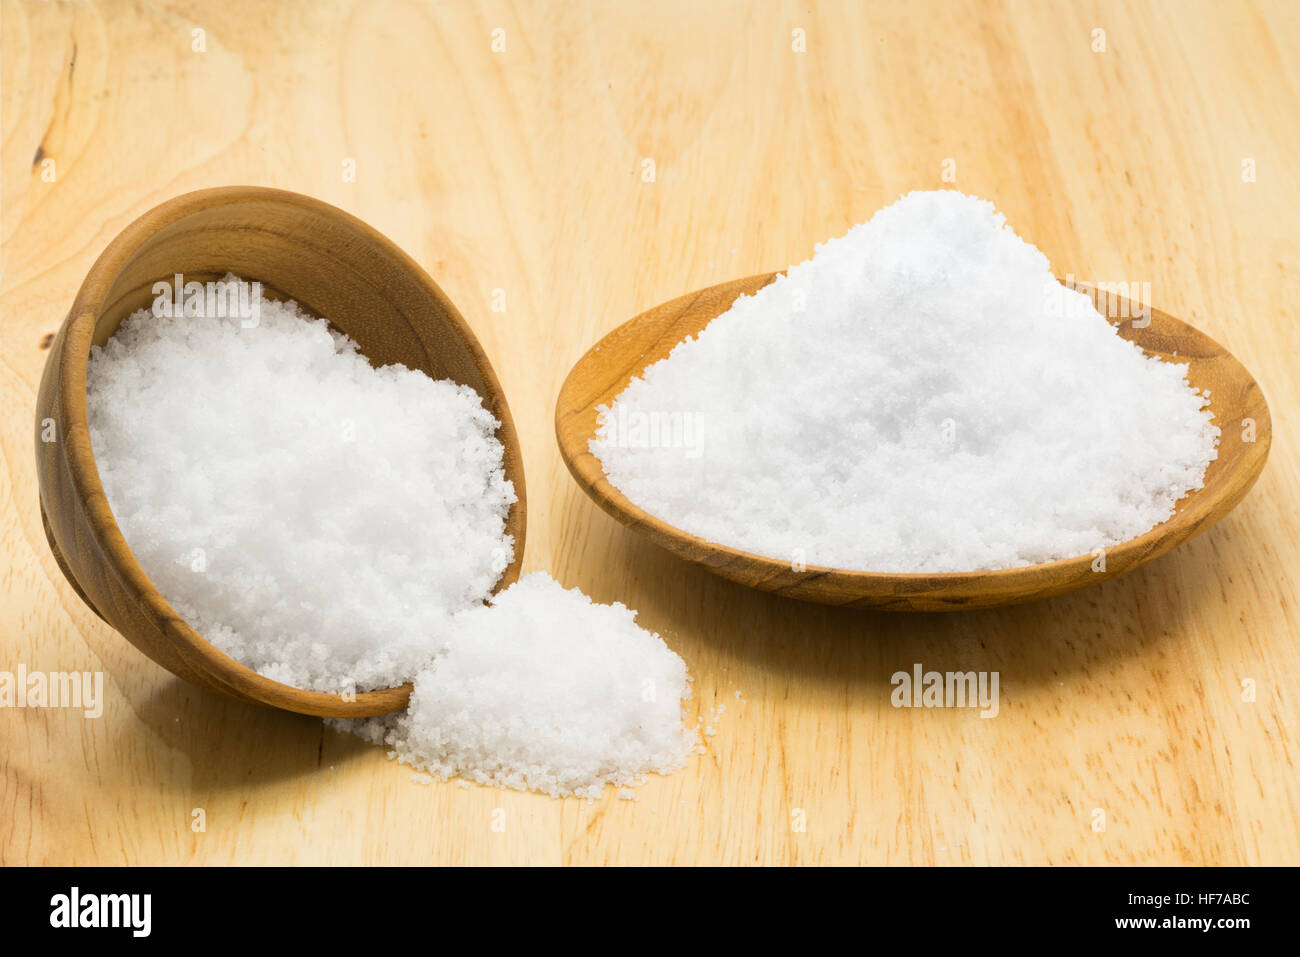 White sea salt in wooden plate and wooden bowl on wooden board Stock Photo